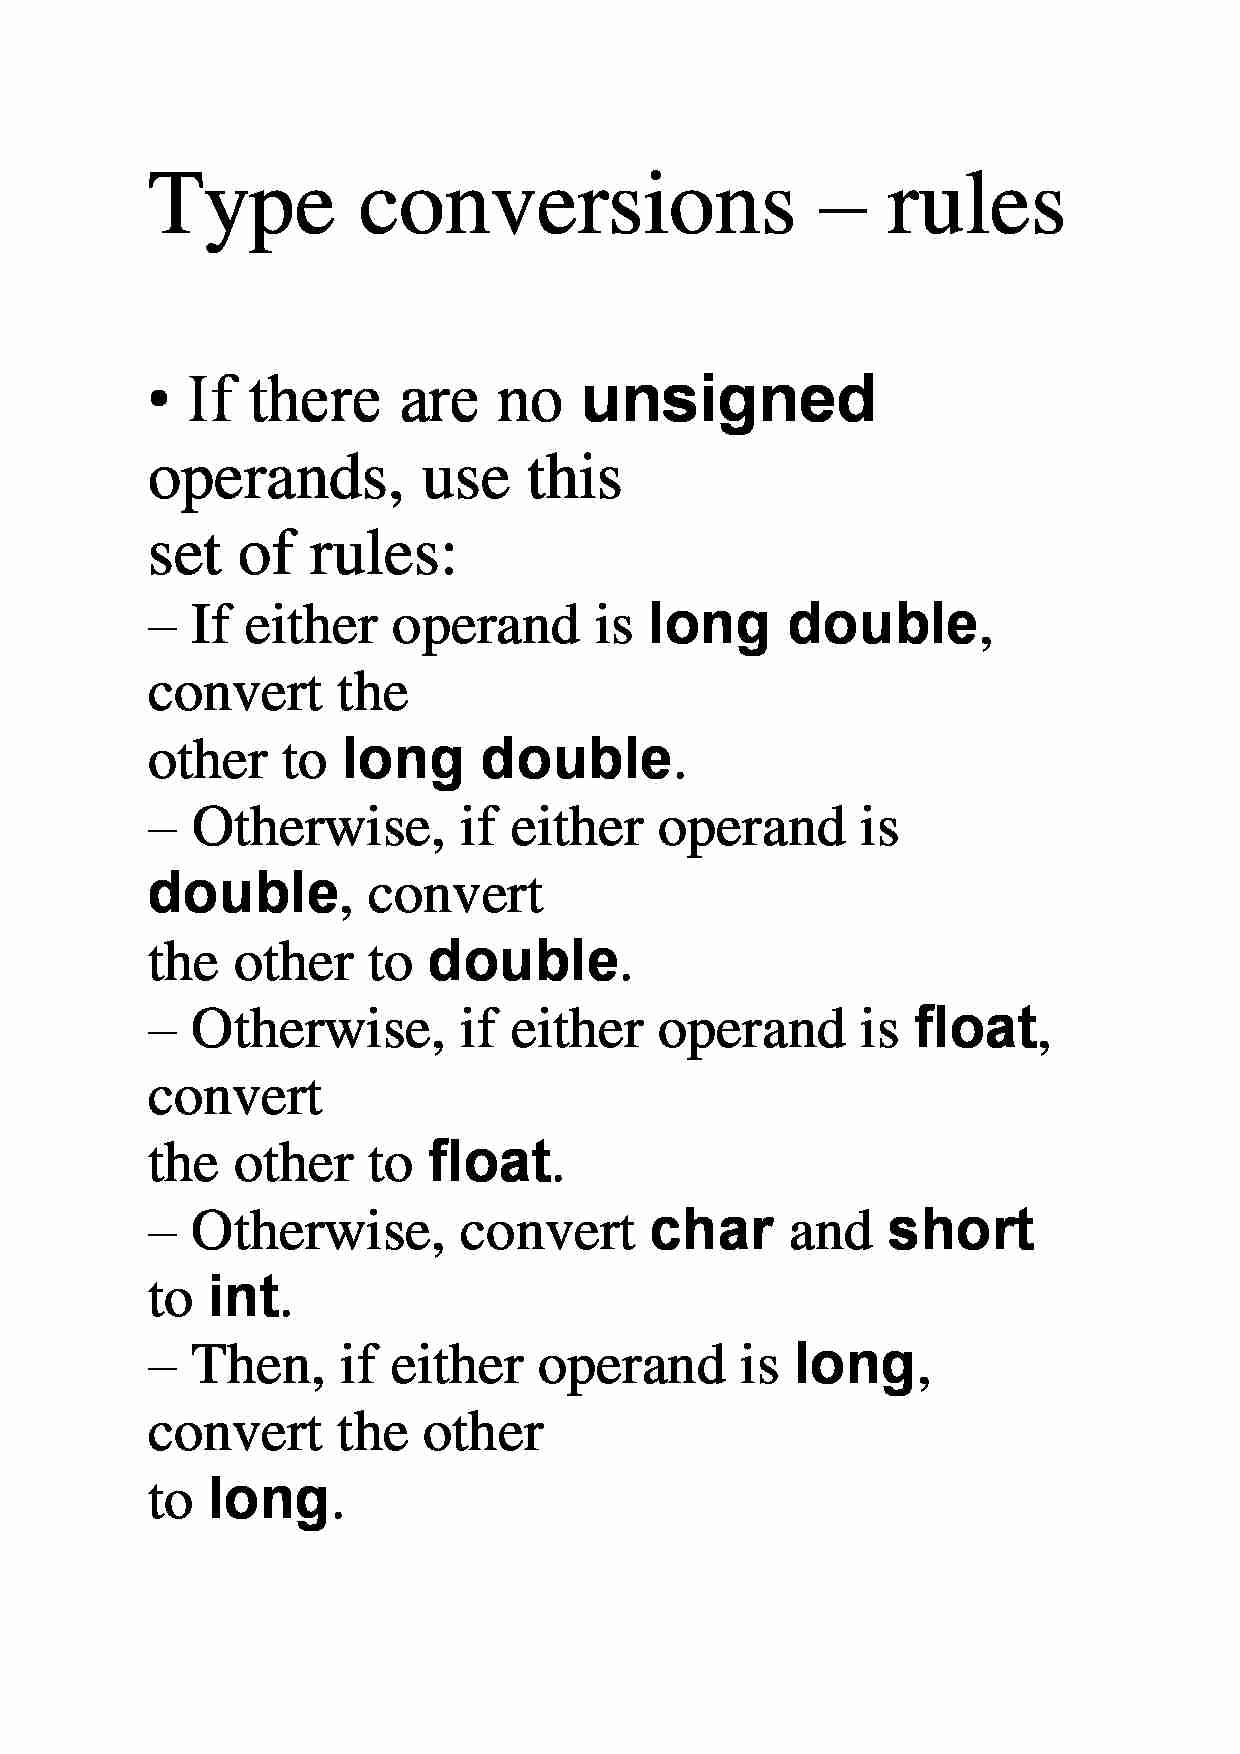 Rules of Type conversion - strona 1